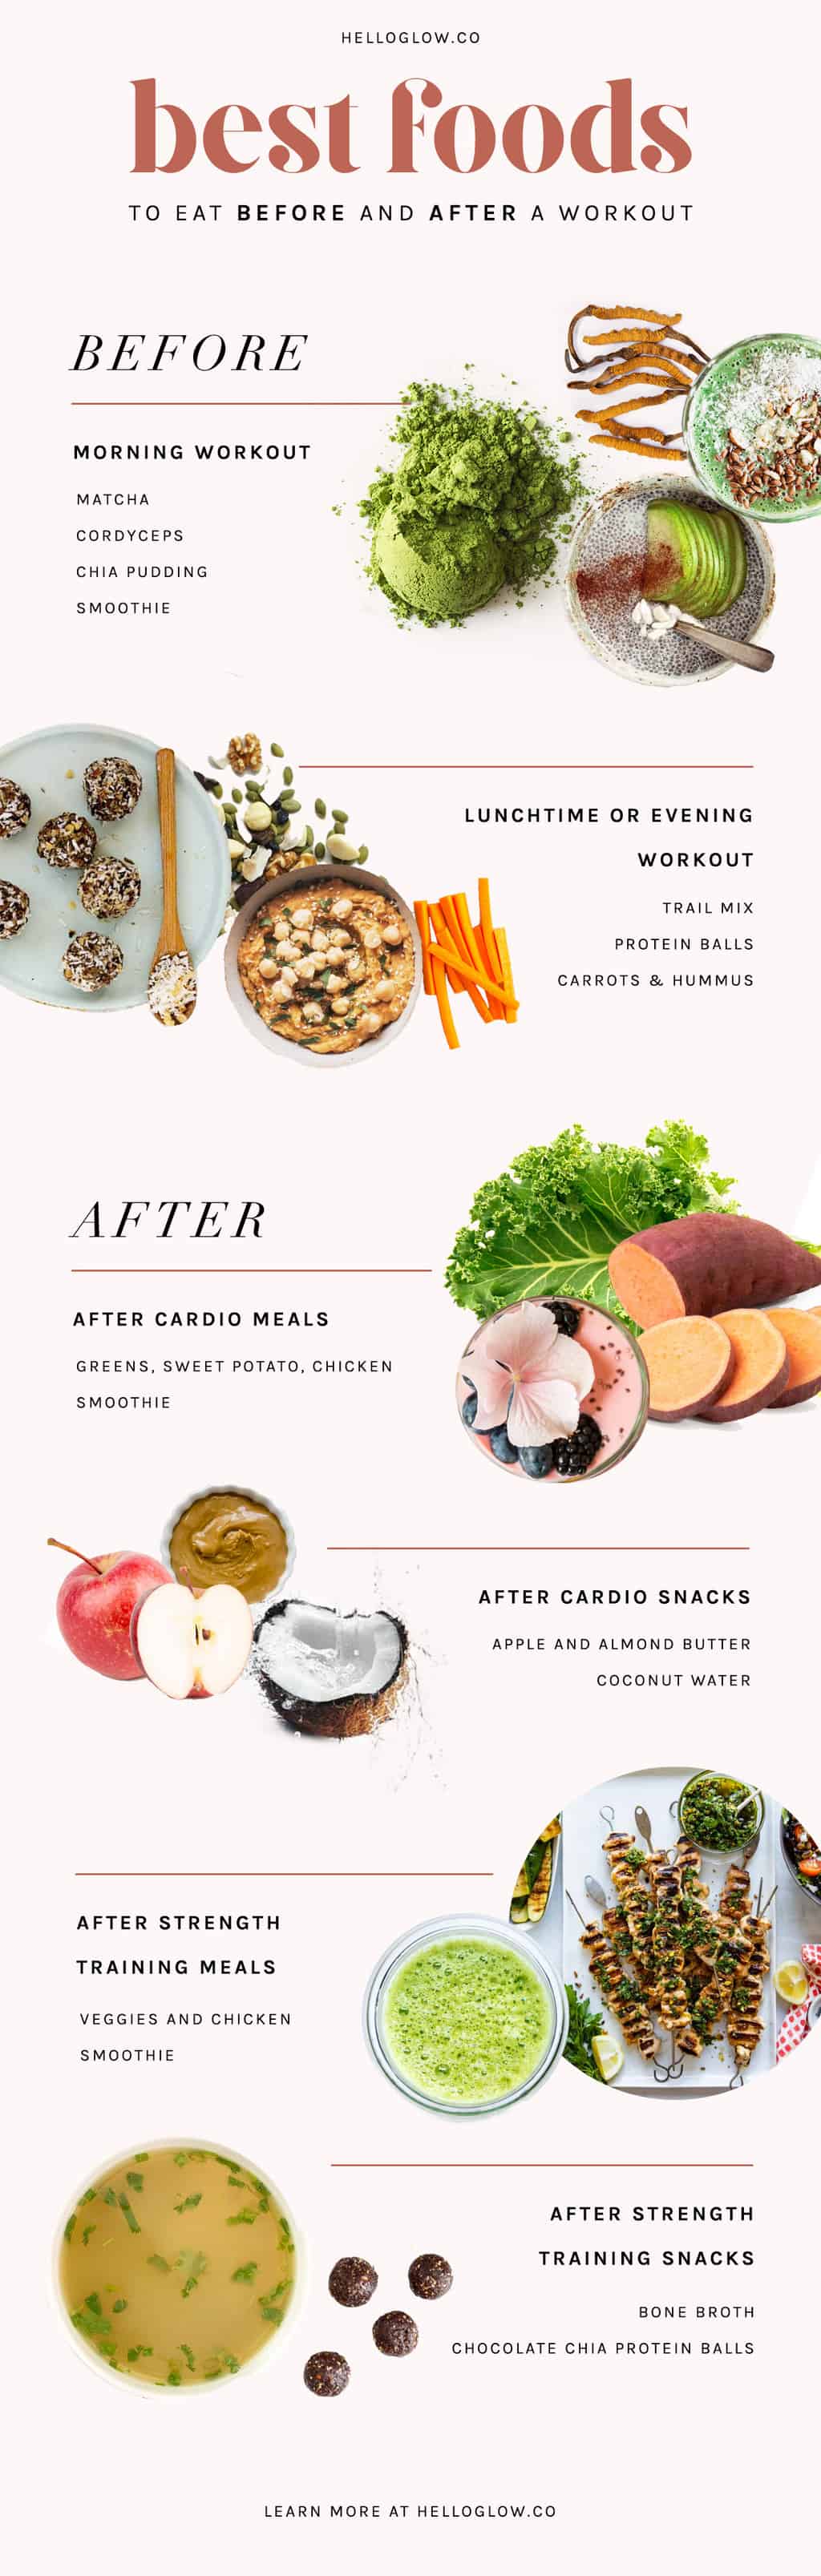 Best Foods Before and After a Workout